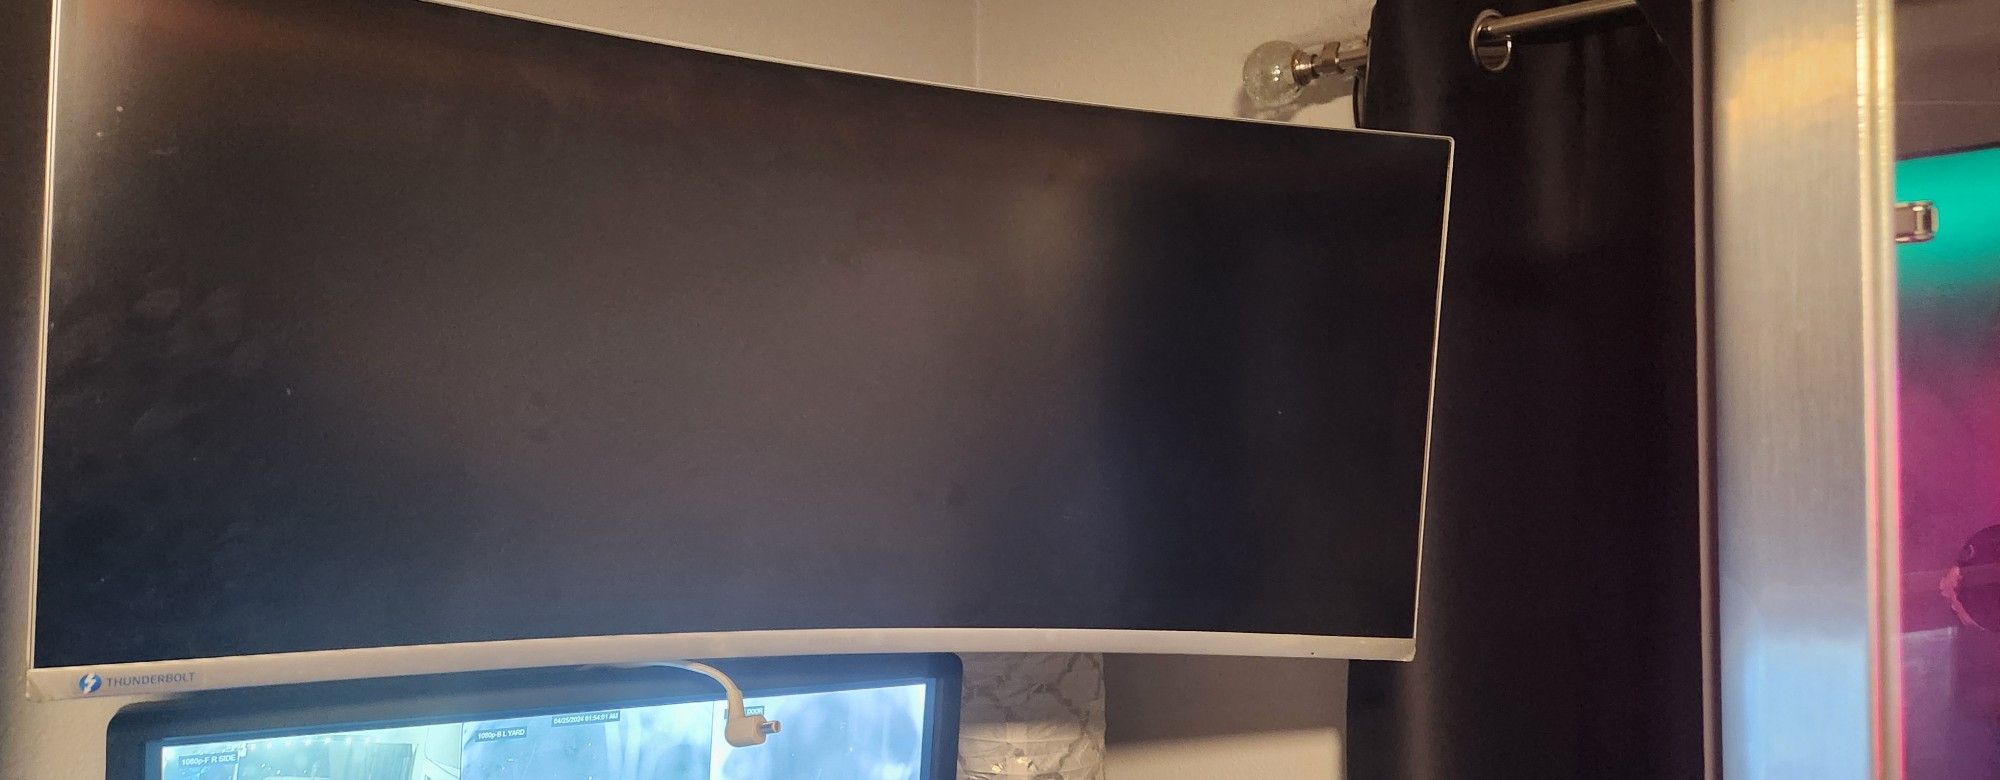 Samsung Ultra Wide Curved Thunderbolt Monitor 34"